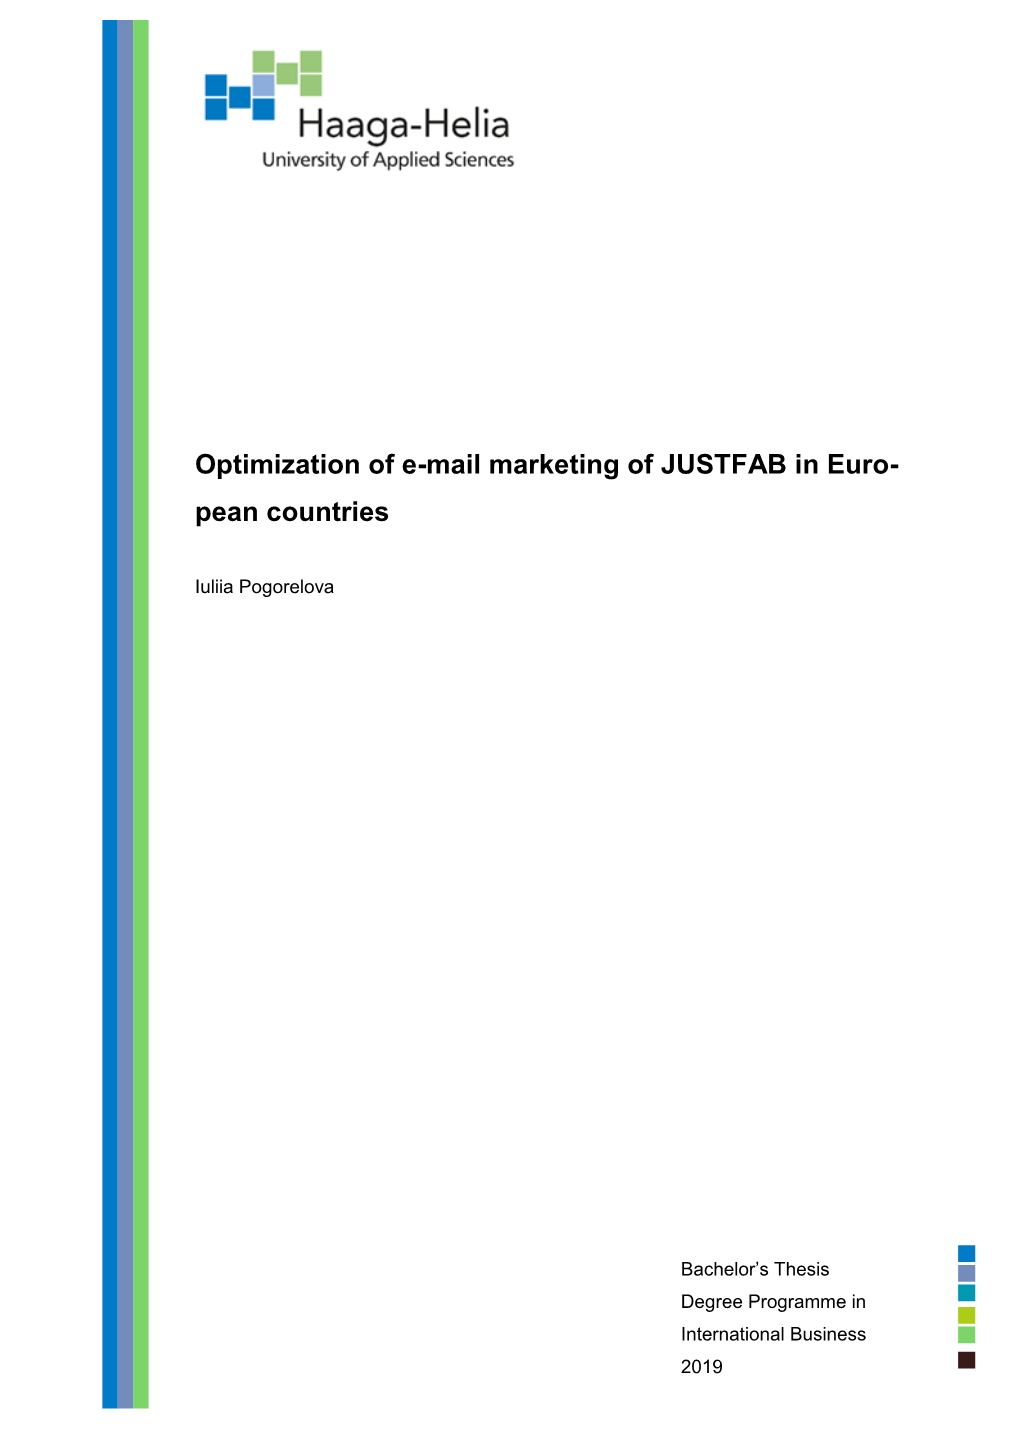 Optimization of E-Mail Marketing of JUSTFAB in Euro- Pean Countries